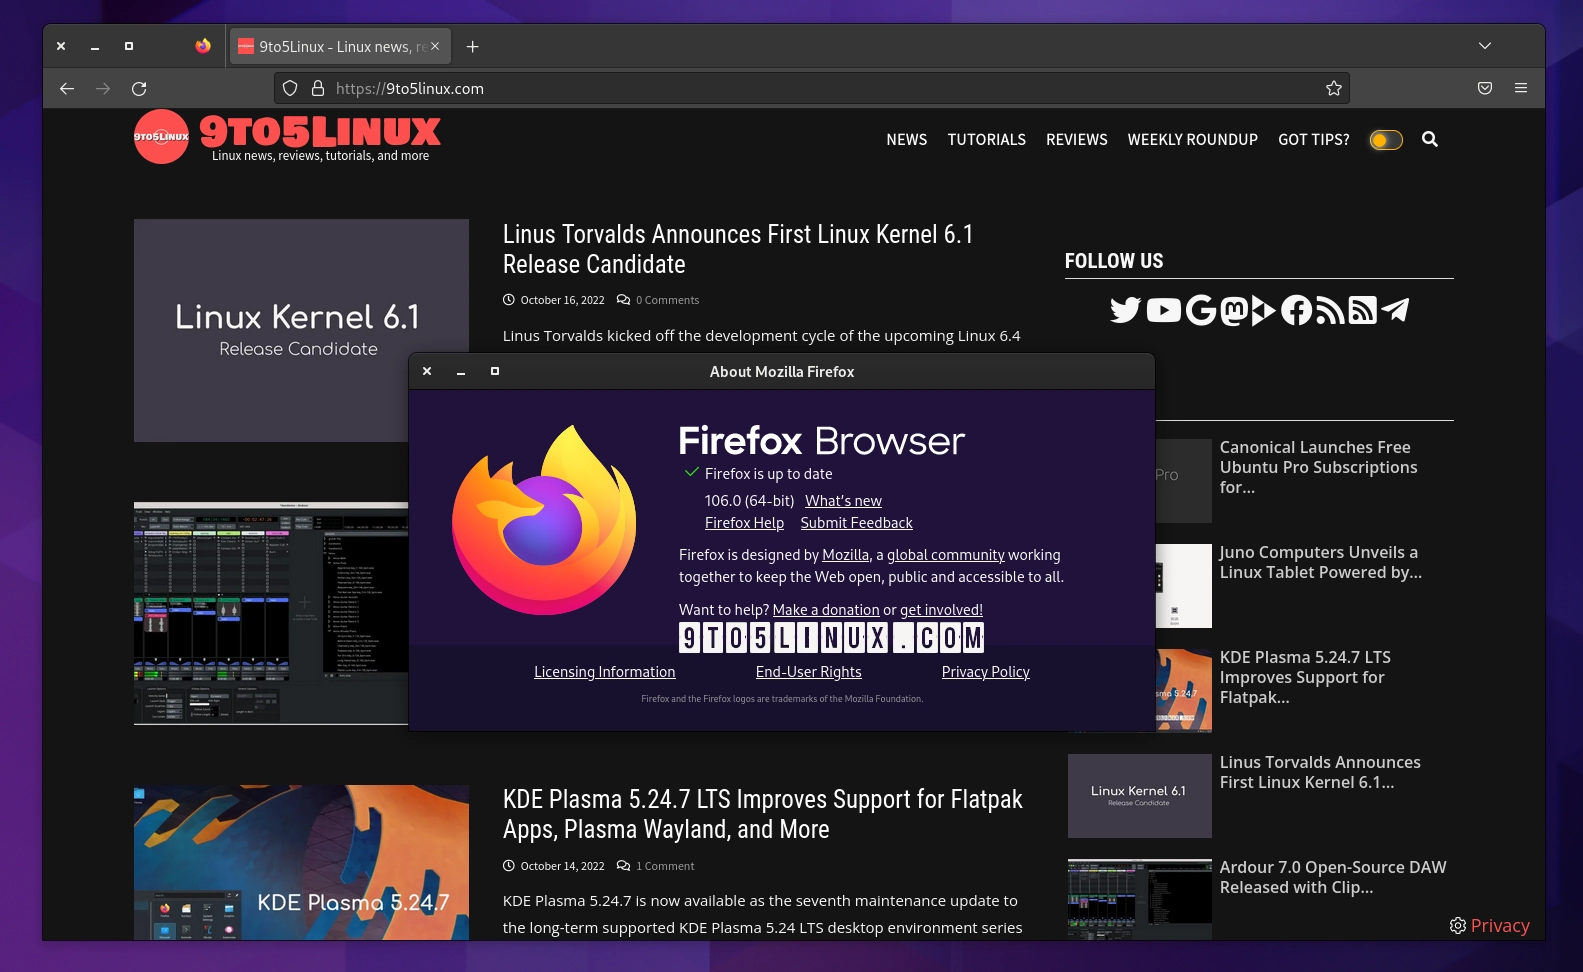 Mozilla Firefox 106 Is Now Available for Download with PDF Annotation, Firefox View